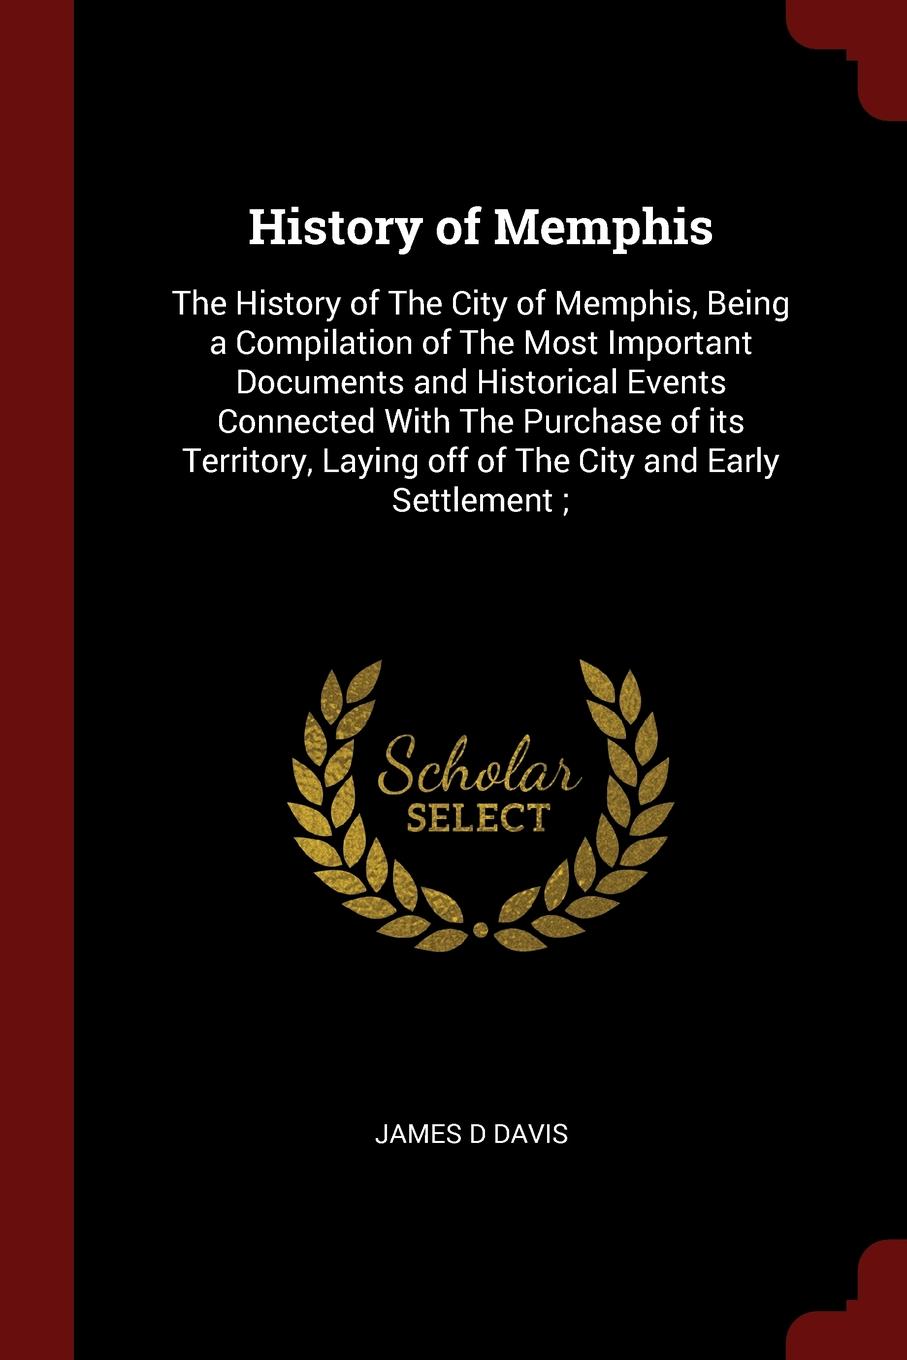 History of Memphis. The History of The City of Memphis, Being a Compilation of The Most Important Documents and Historical Events Connected With The Purchase of its Territory, Laying off of The City and Early Settlement ;